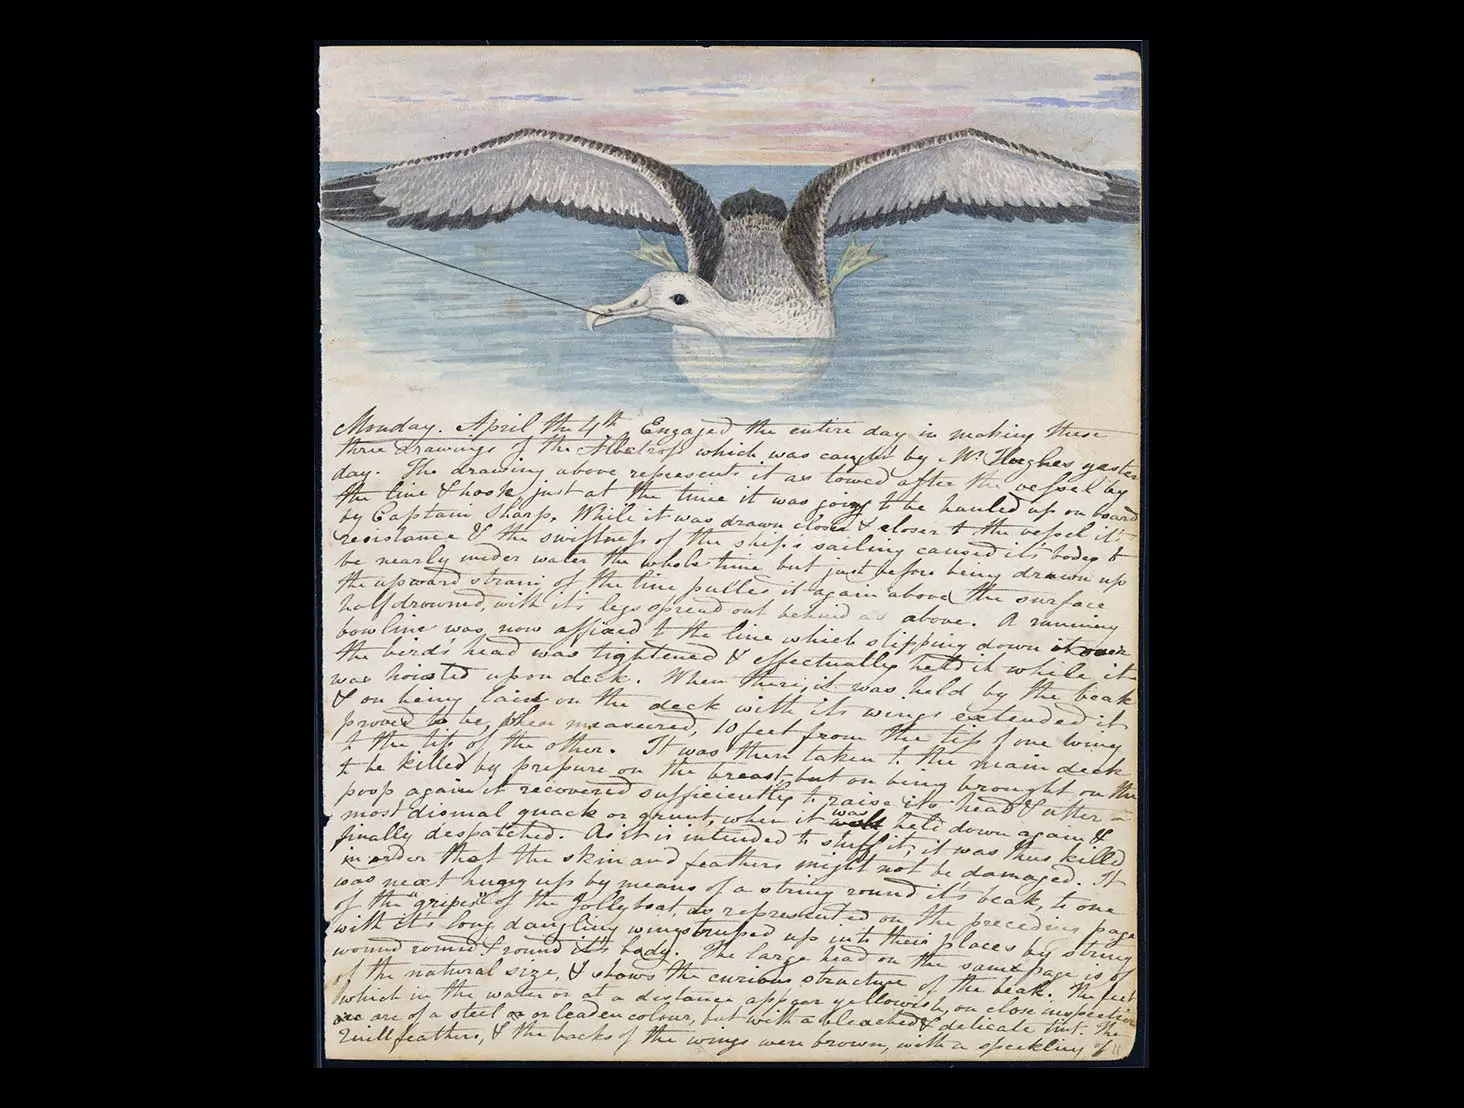 Page in a diary showing a drawing of a captured toroa (albatross) and the diary entry below.